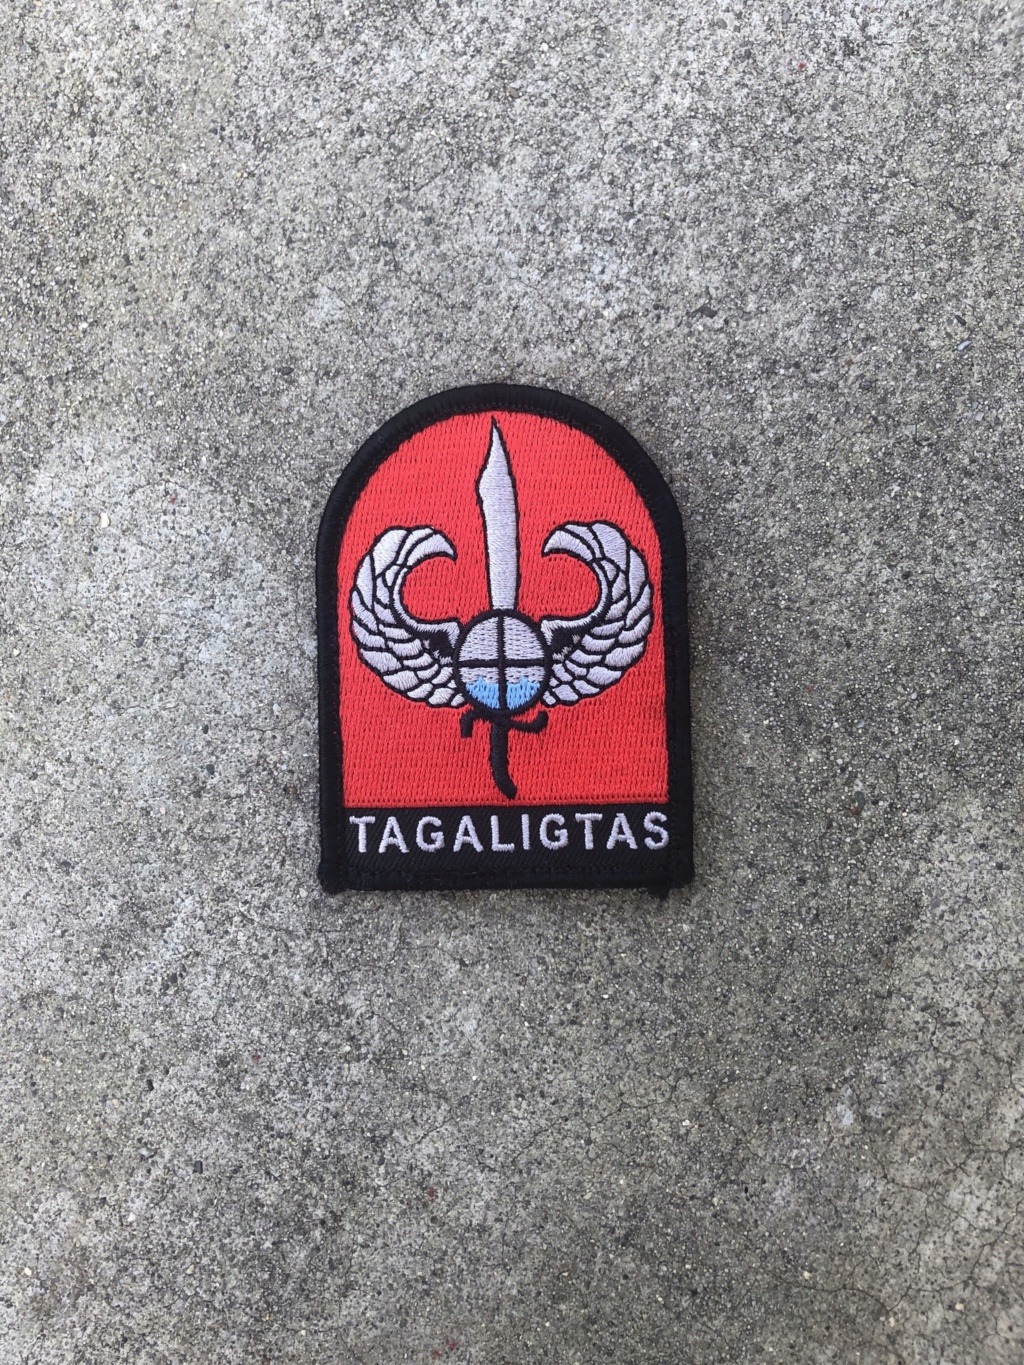 Philippine National Police Patches 79e96c10